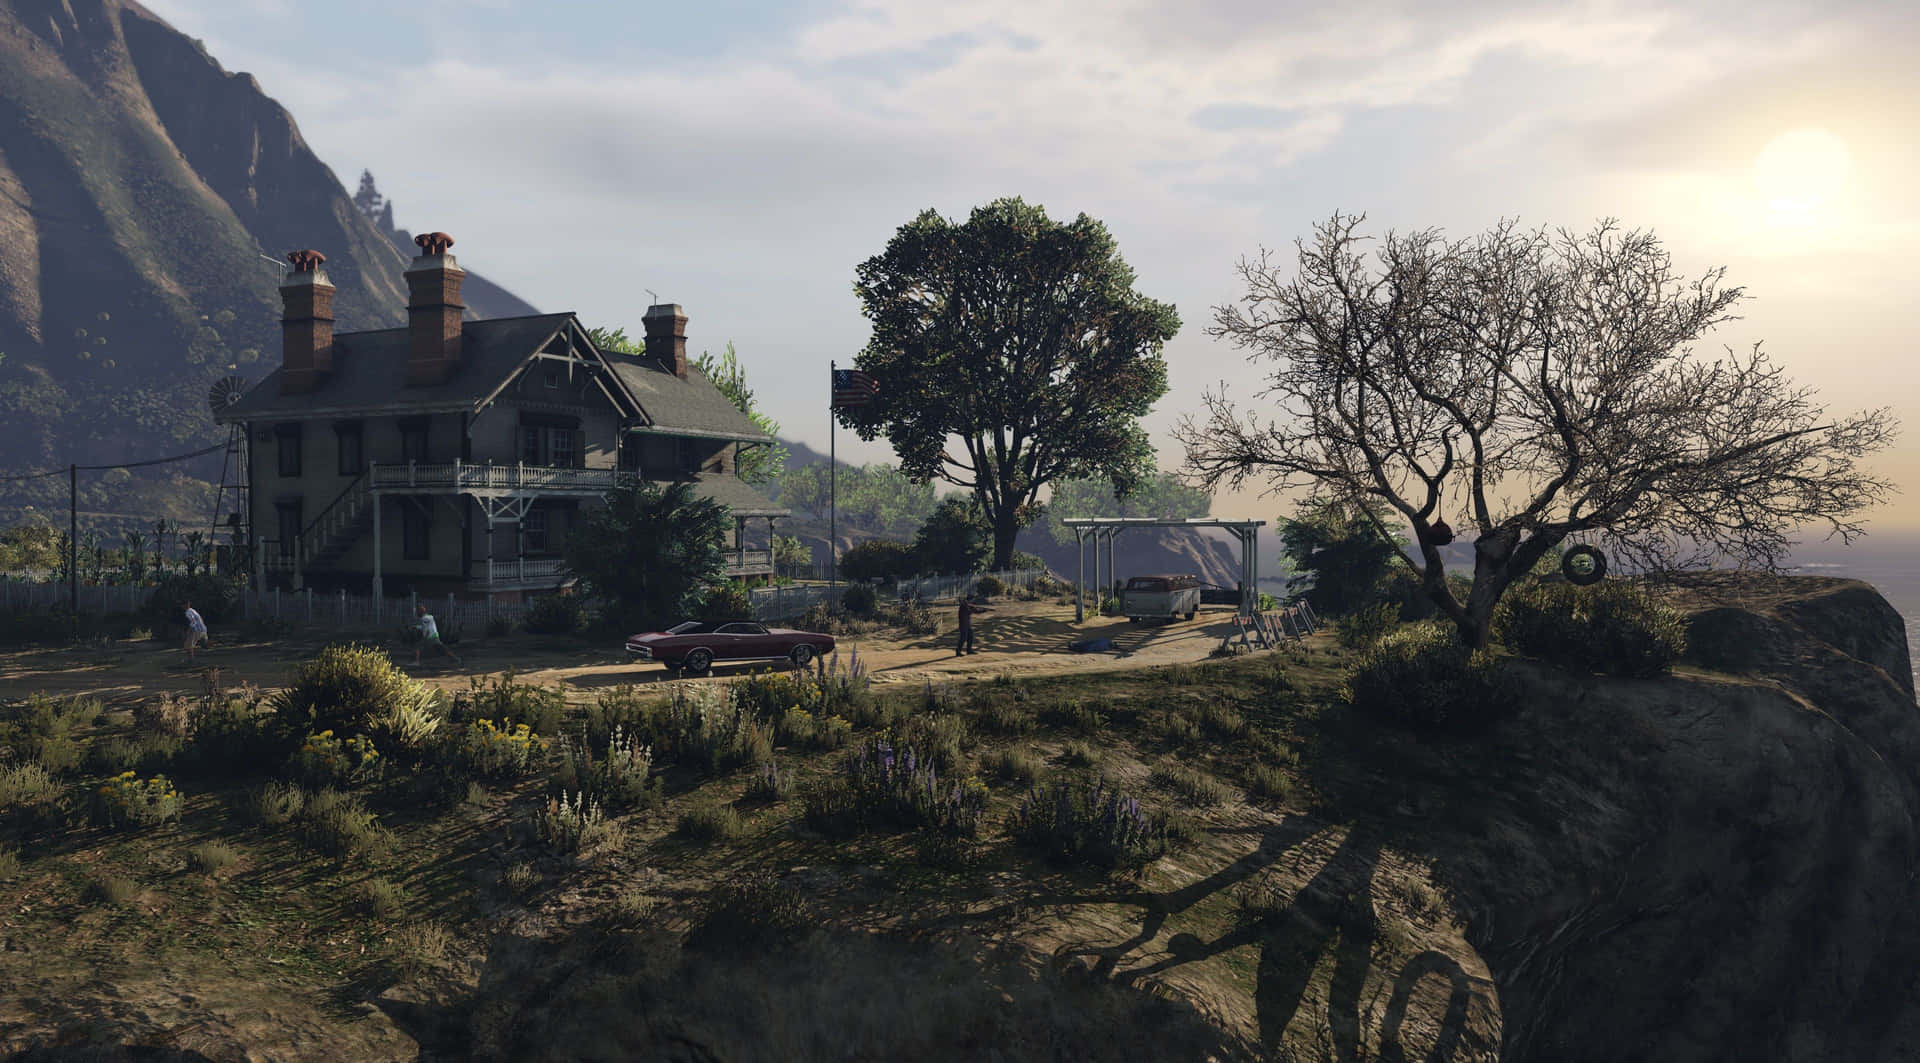 Master The World Of Gta 5 With An Immersive Desktop Experience.